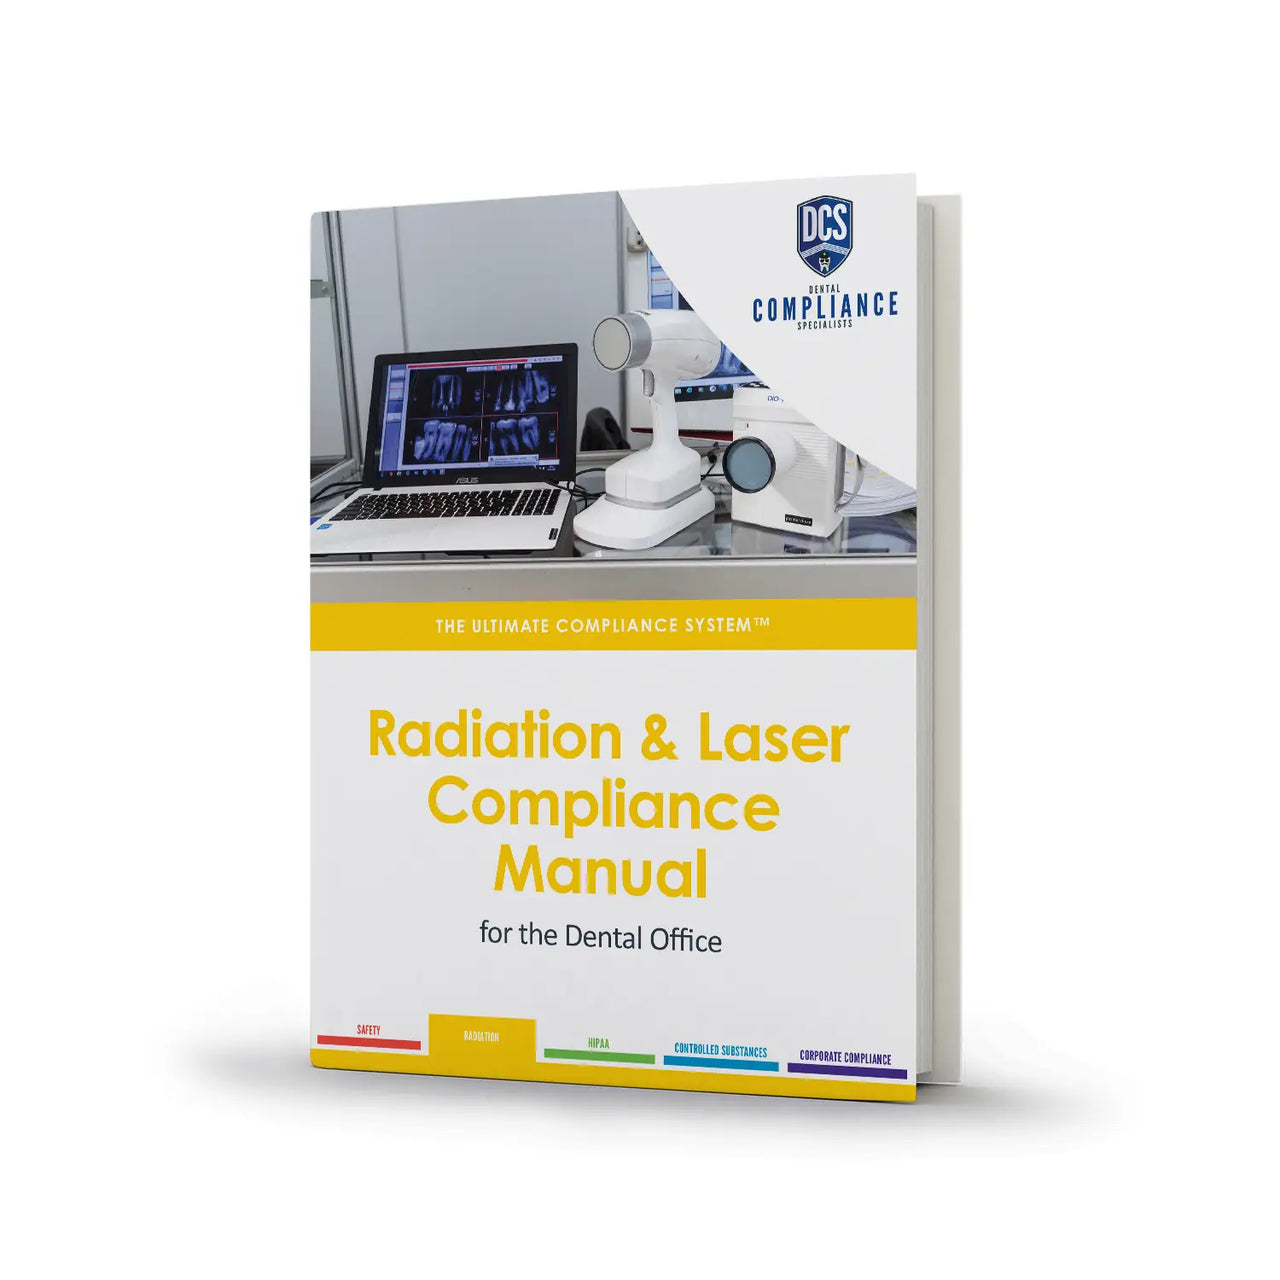 Radiation & Laser Compliance Manual for the Dental Office